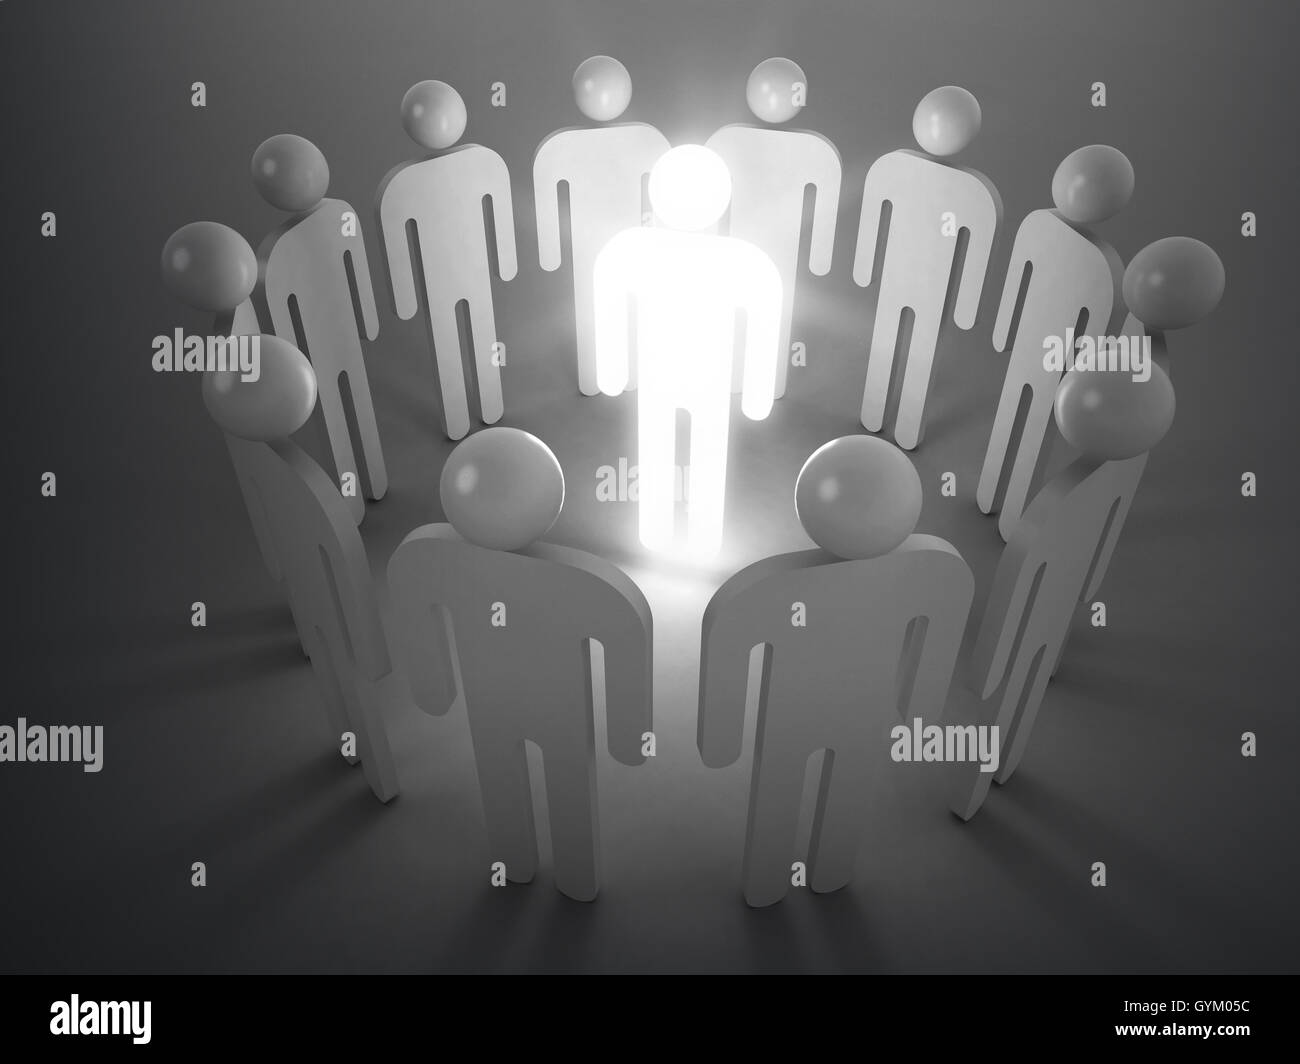 Creativity idea metaphor. One shining man stand in round of ordinary people, 3d illustration Stock Photo